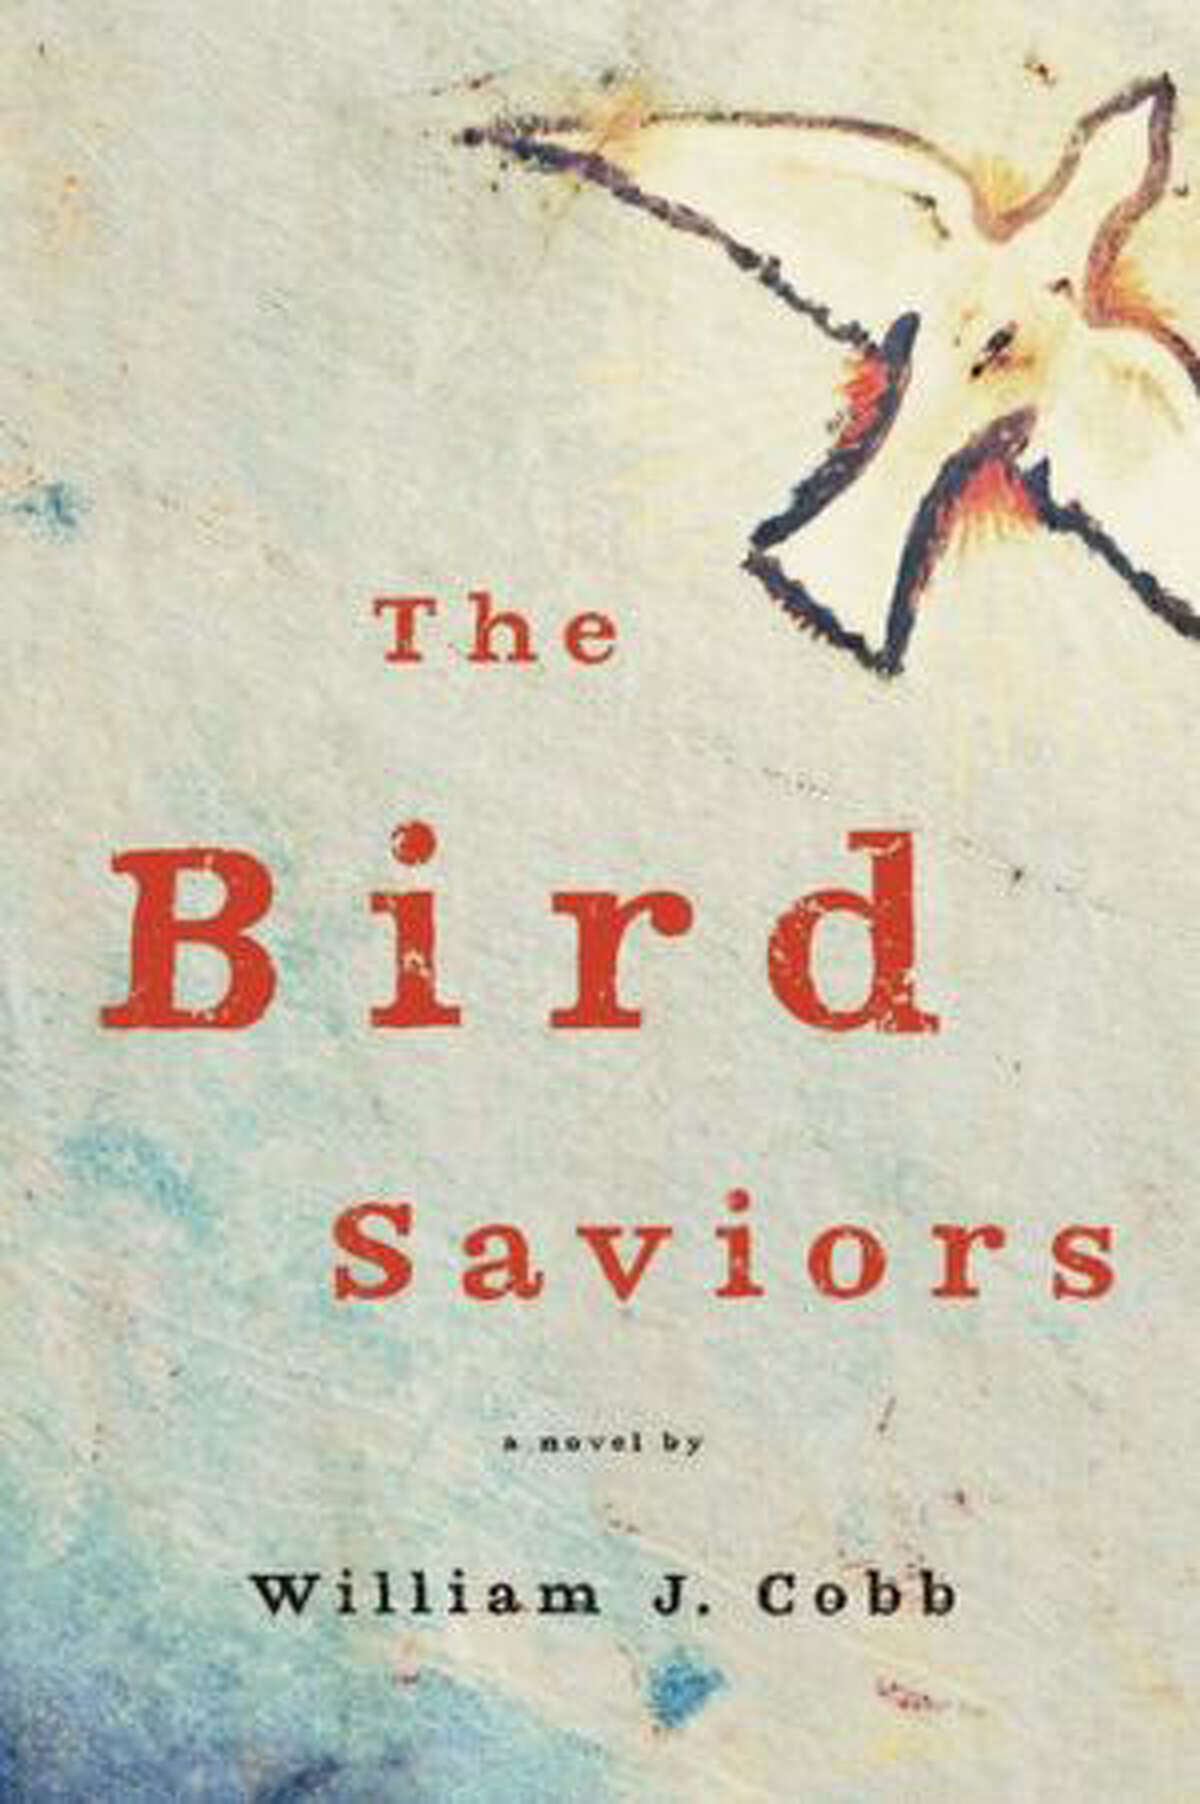 Birds in many cultures are considered a link between heaven and earth. In William J. Cobb’s fierce new novel “The Bird Saviors,” our winged companions are harbingers of environmental disaster in a near-future time of economic turmoil, fundamentalist sects, weather change, severe drought, work shortages, immigration crisis and systemic corruption.